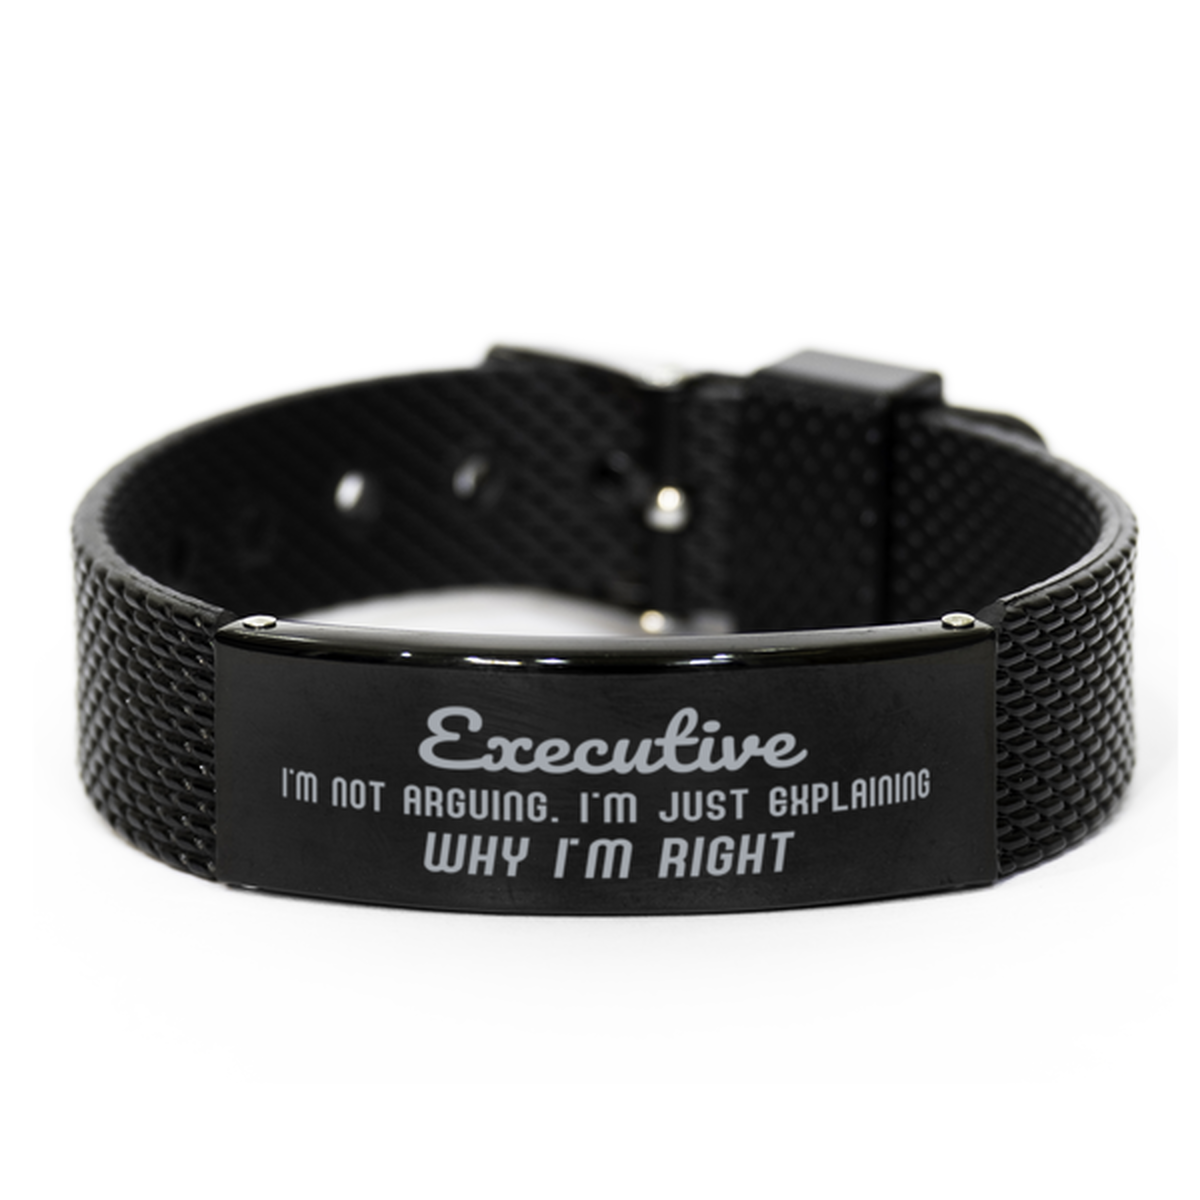 Executive I'm not Arguing. I'm Just Explaining Why I'm RIGHT Black Shark Mesh Bracelet, Funny Saying Quote Executive Gifts For Executive Graduation Birthday Christmas Gifts for Men Women Coworker